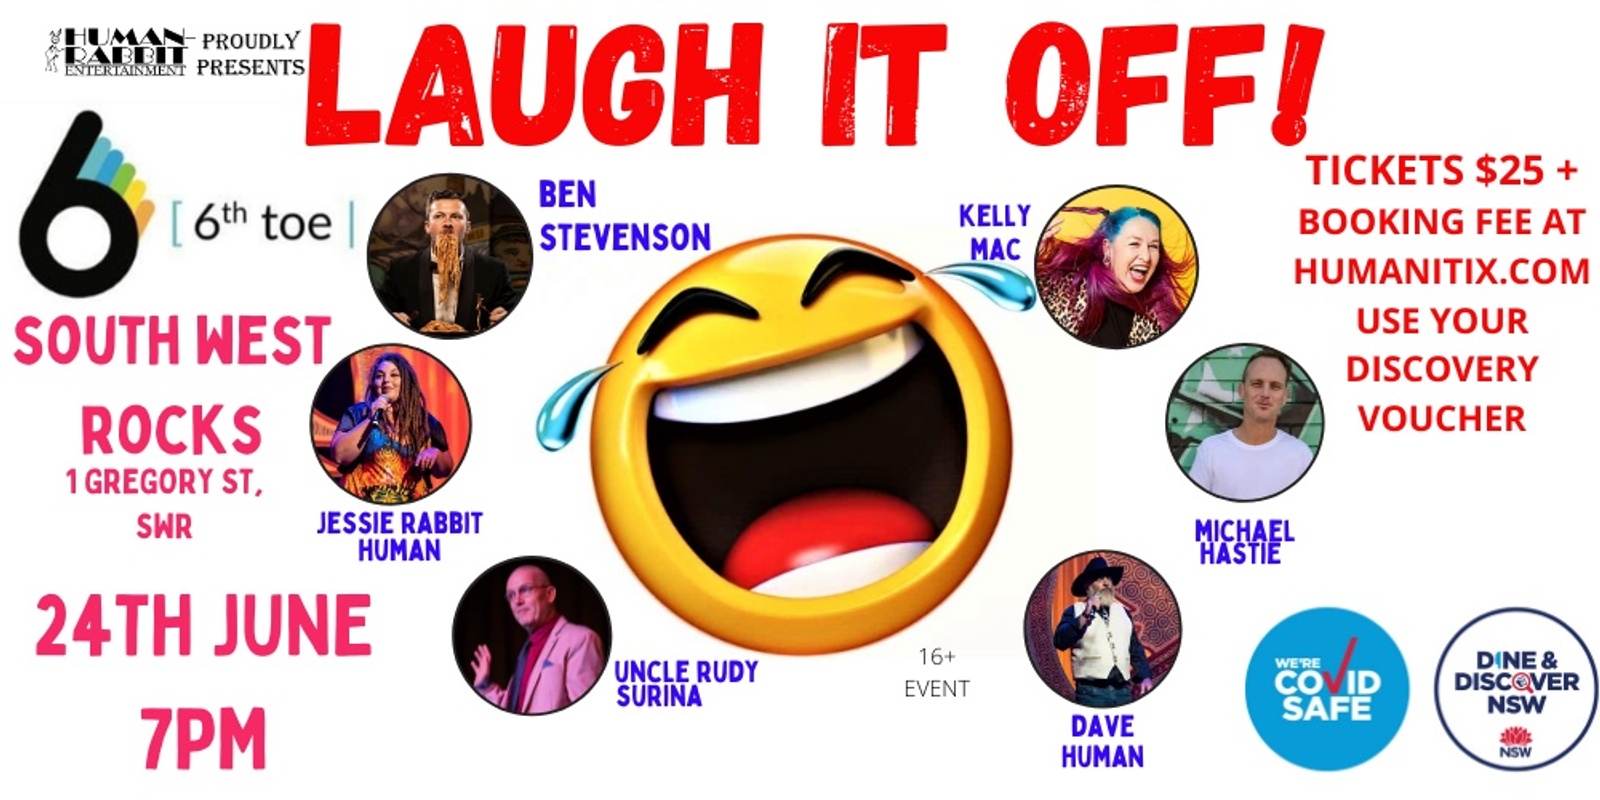 Banner image for LAUGH IT OFF!-6TH TOE, SOUTH WEST ROCKS